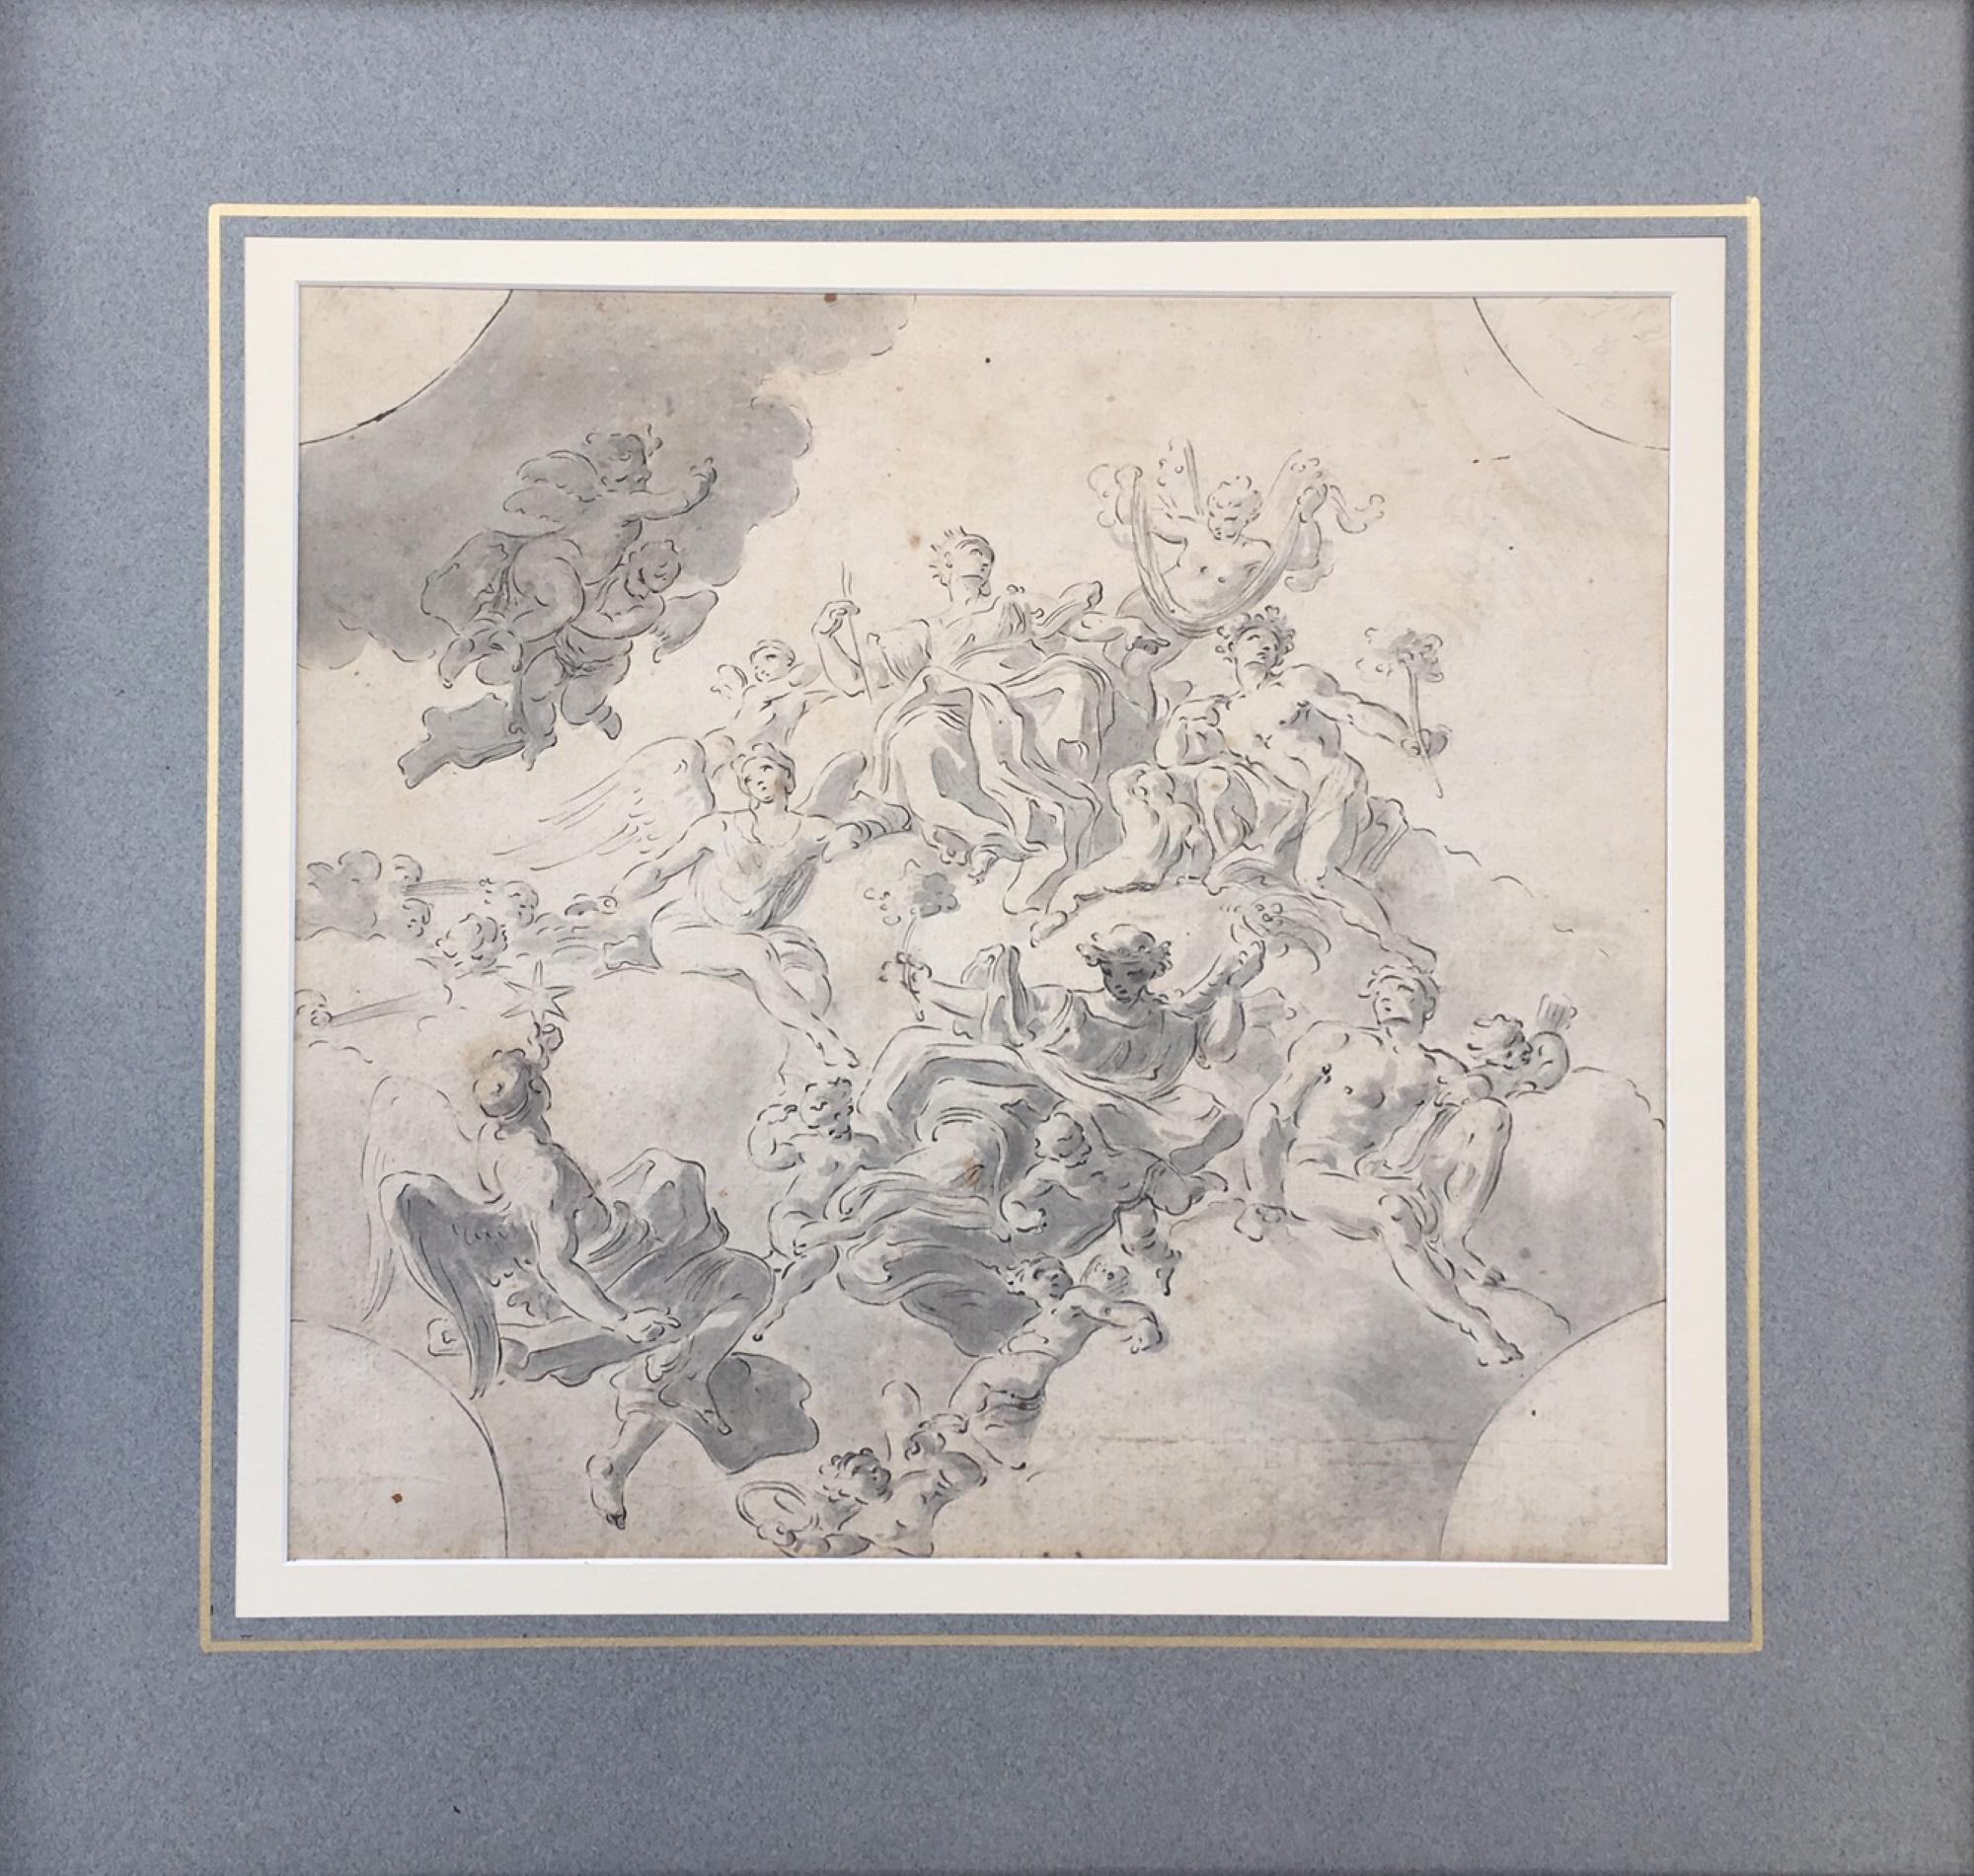 Original Drawing, Circle of Giovanni Battista Tiepolo 1696-1770 Venice, Italy 

Although we offer this old master drawing as circle of Tiepolo, we are convinced, based on the composition, technique and execution that it is by the hand of the master